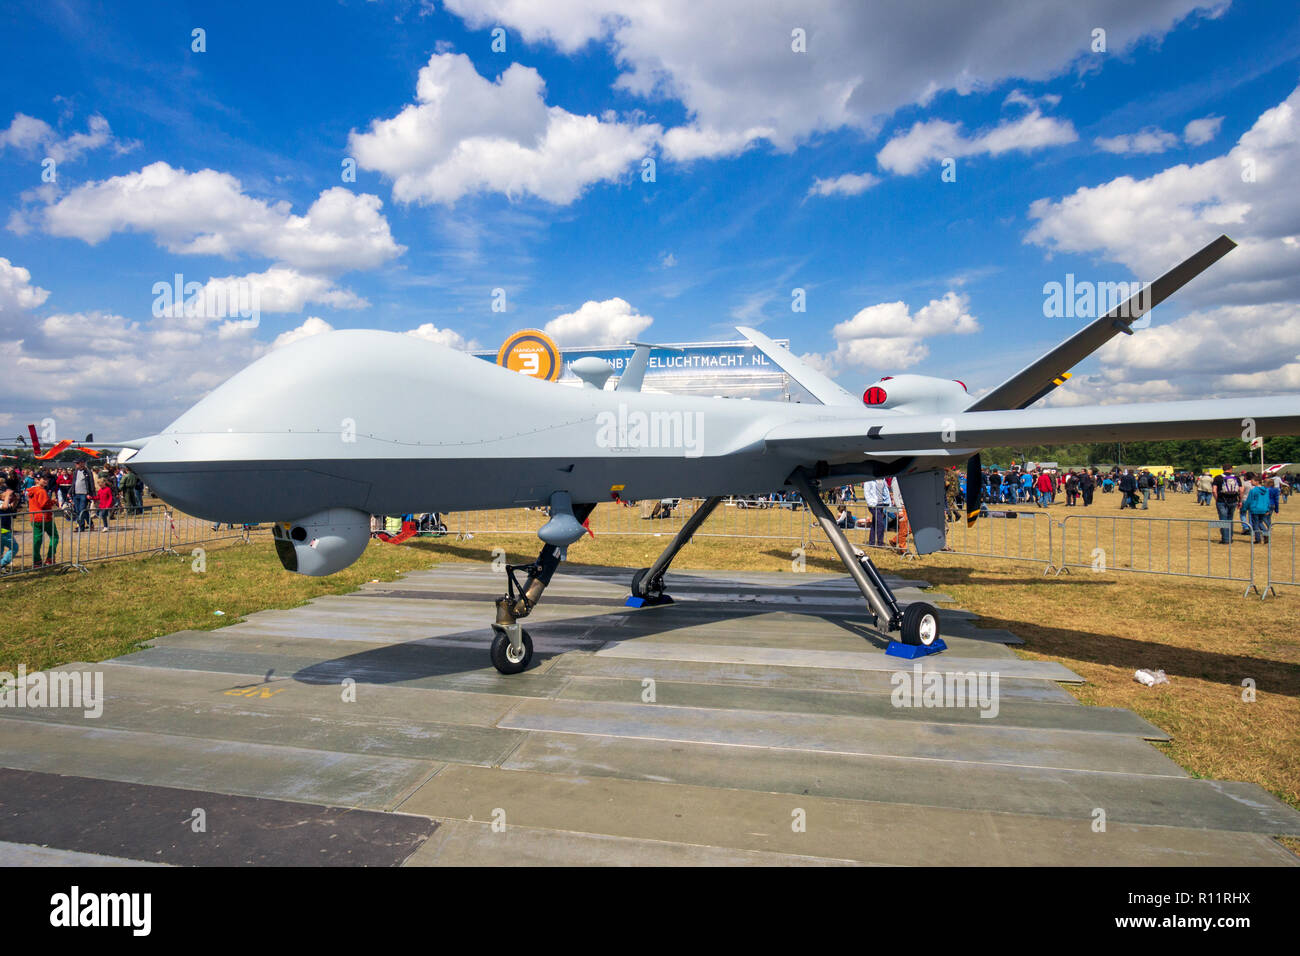 VOLKEL, NETHERLANDS - JUN 15, 2013: Military General Atomics MQ-1 Predator UAV drone on display at the Royal Netherlands Air Force Open Day. Stock Photo